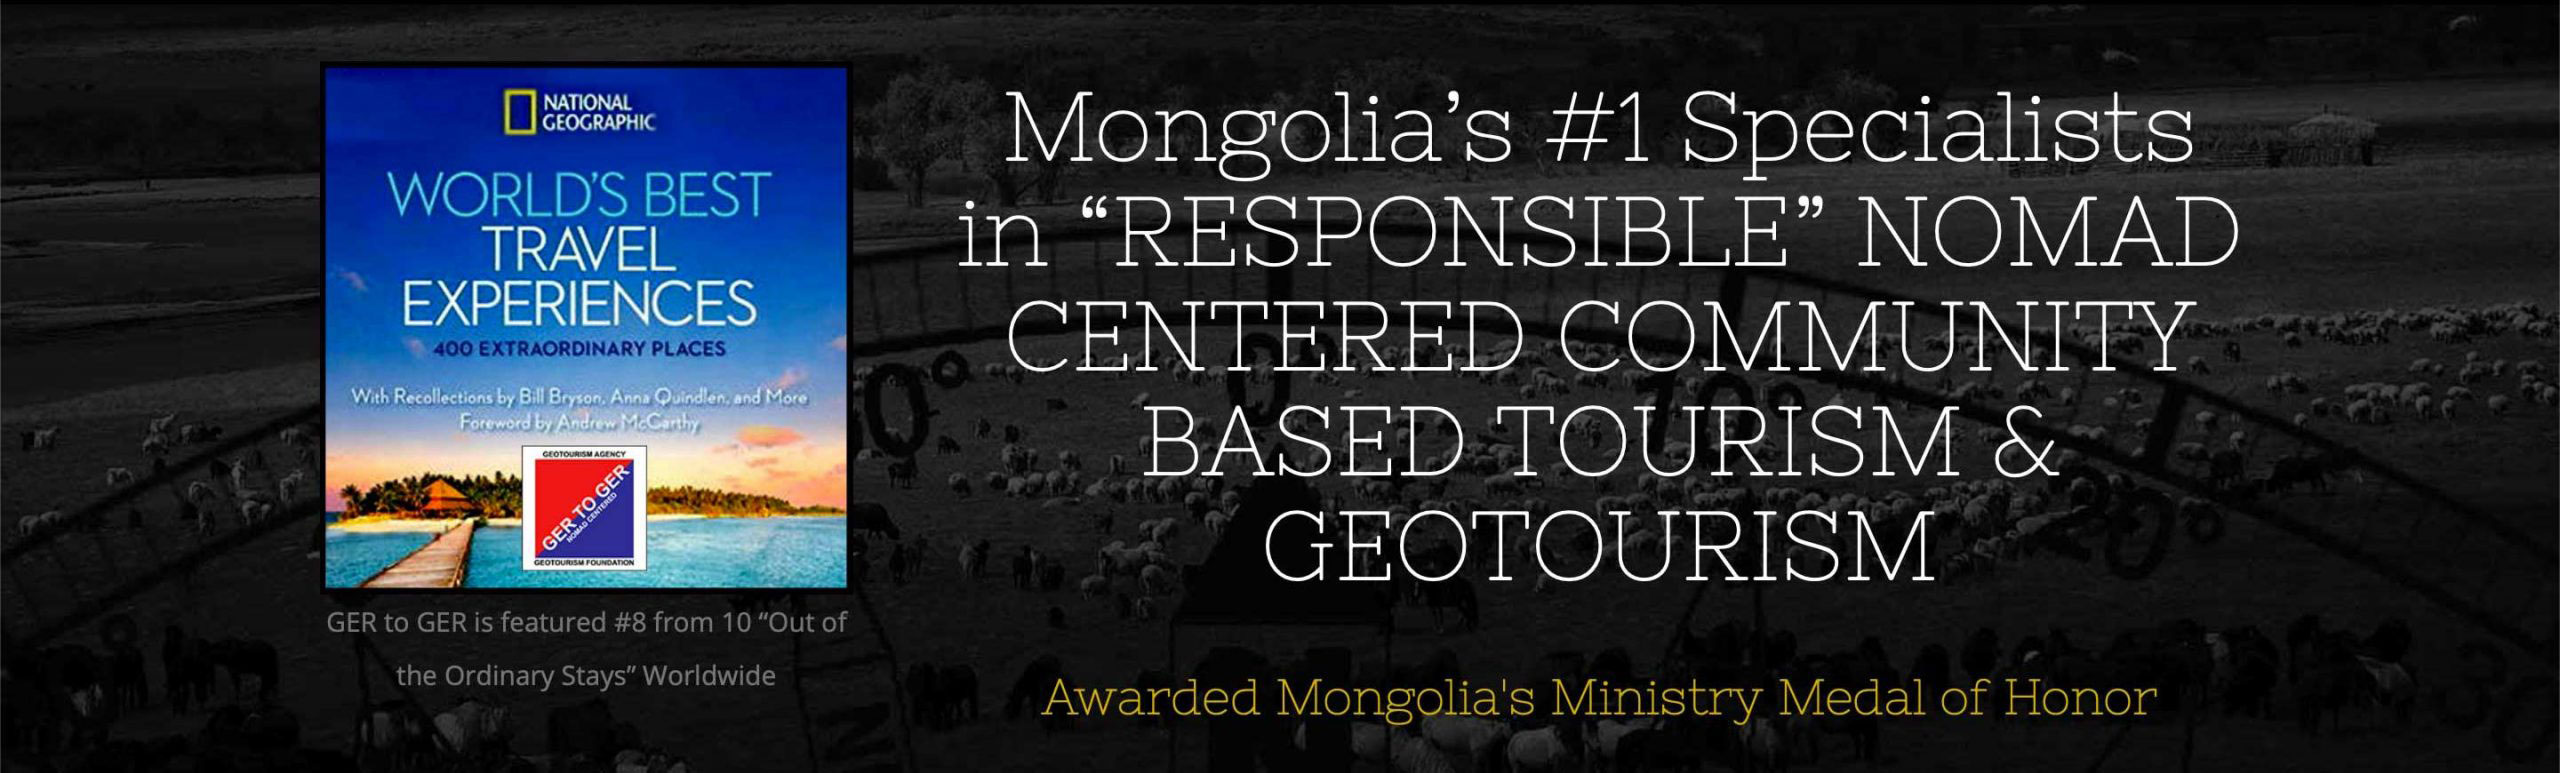 GER to GER GEOtourism Mongolia